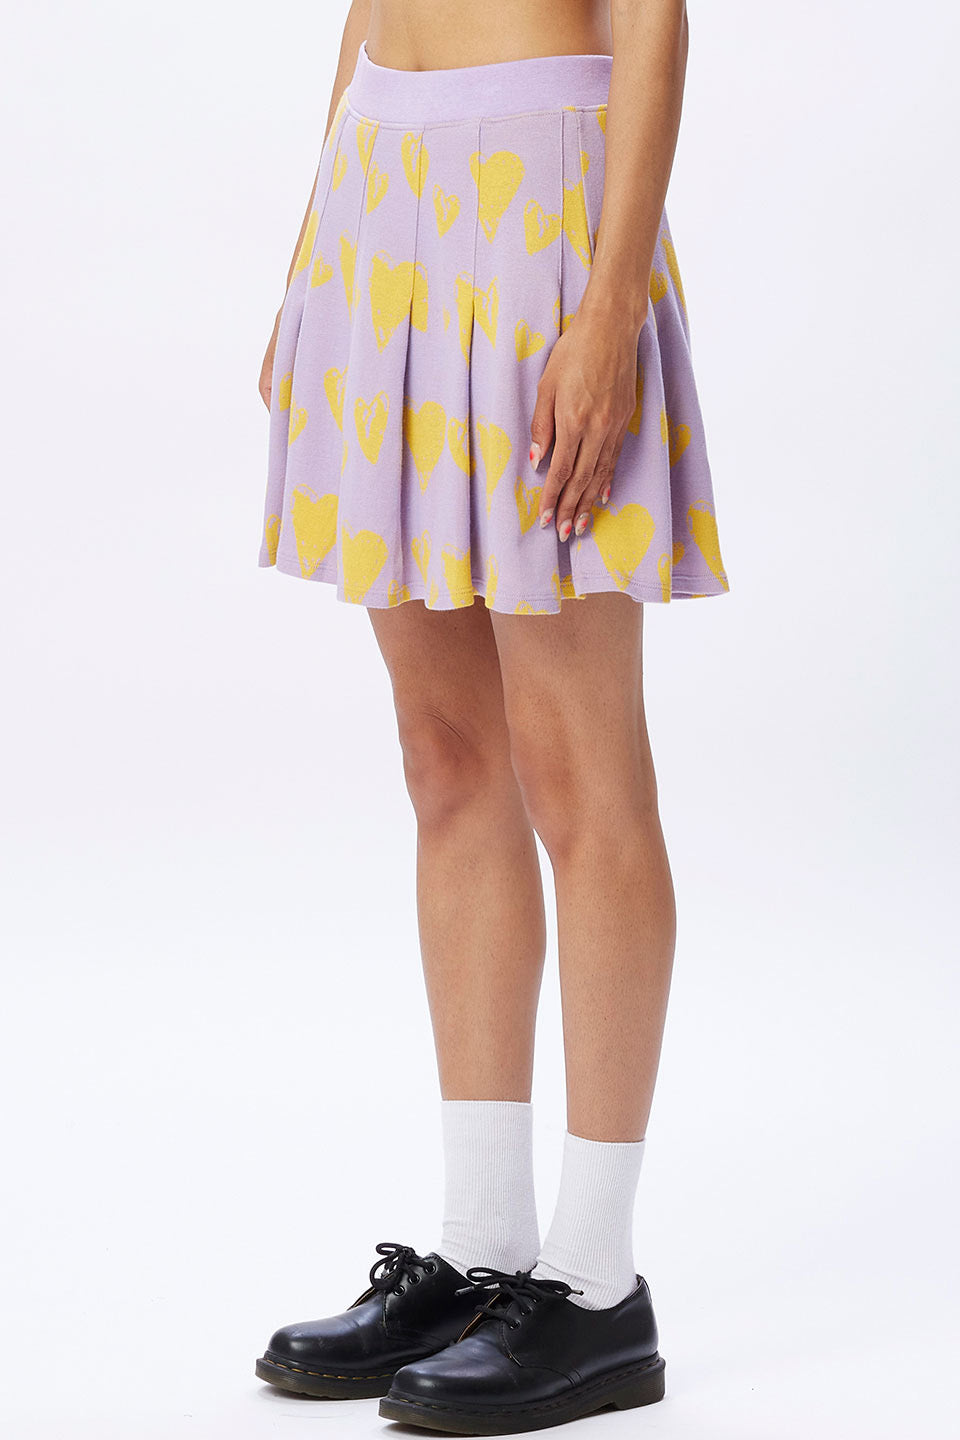 Obey - Carly Pleated Skirt - Digital Lavender Multi - Side